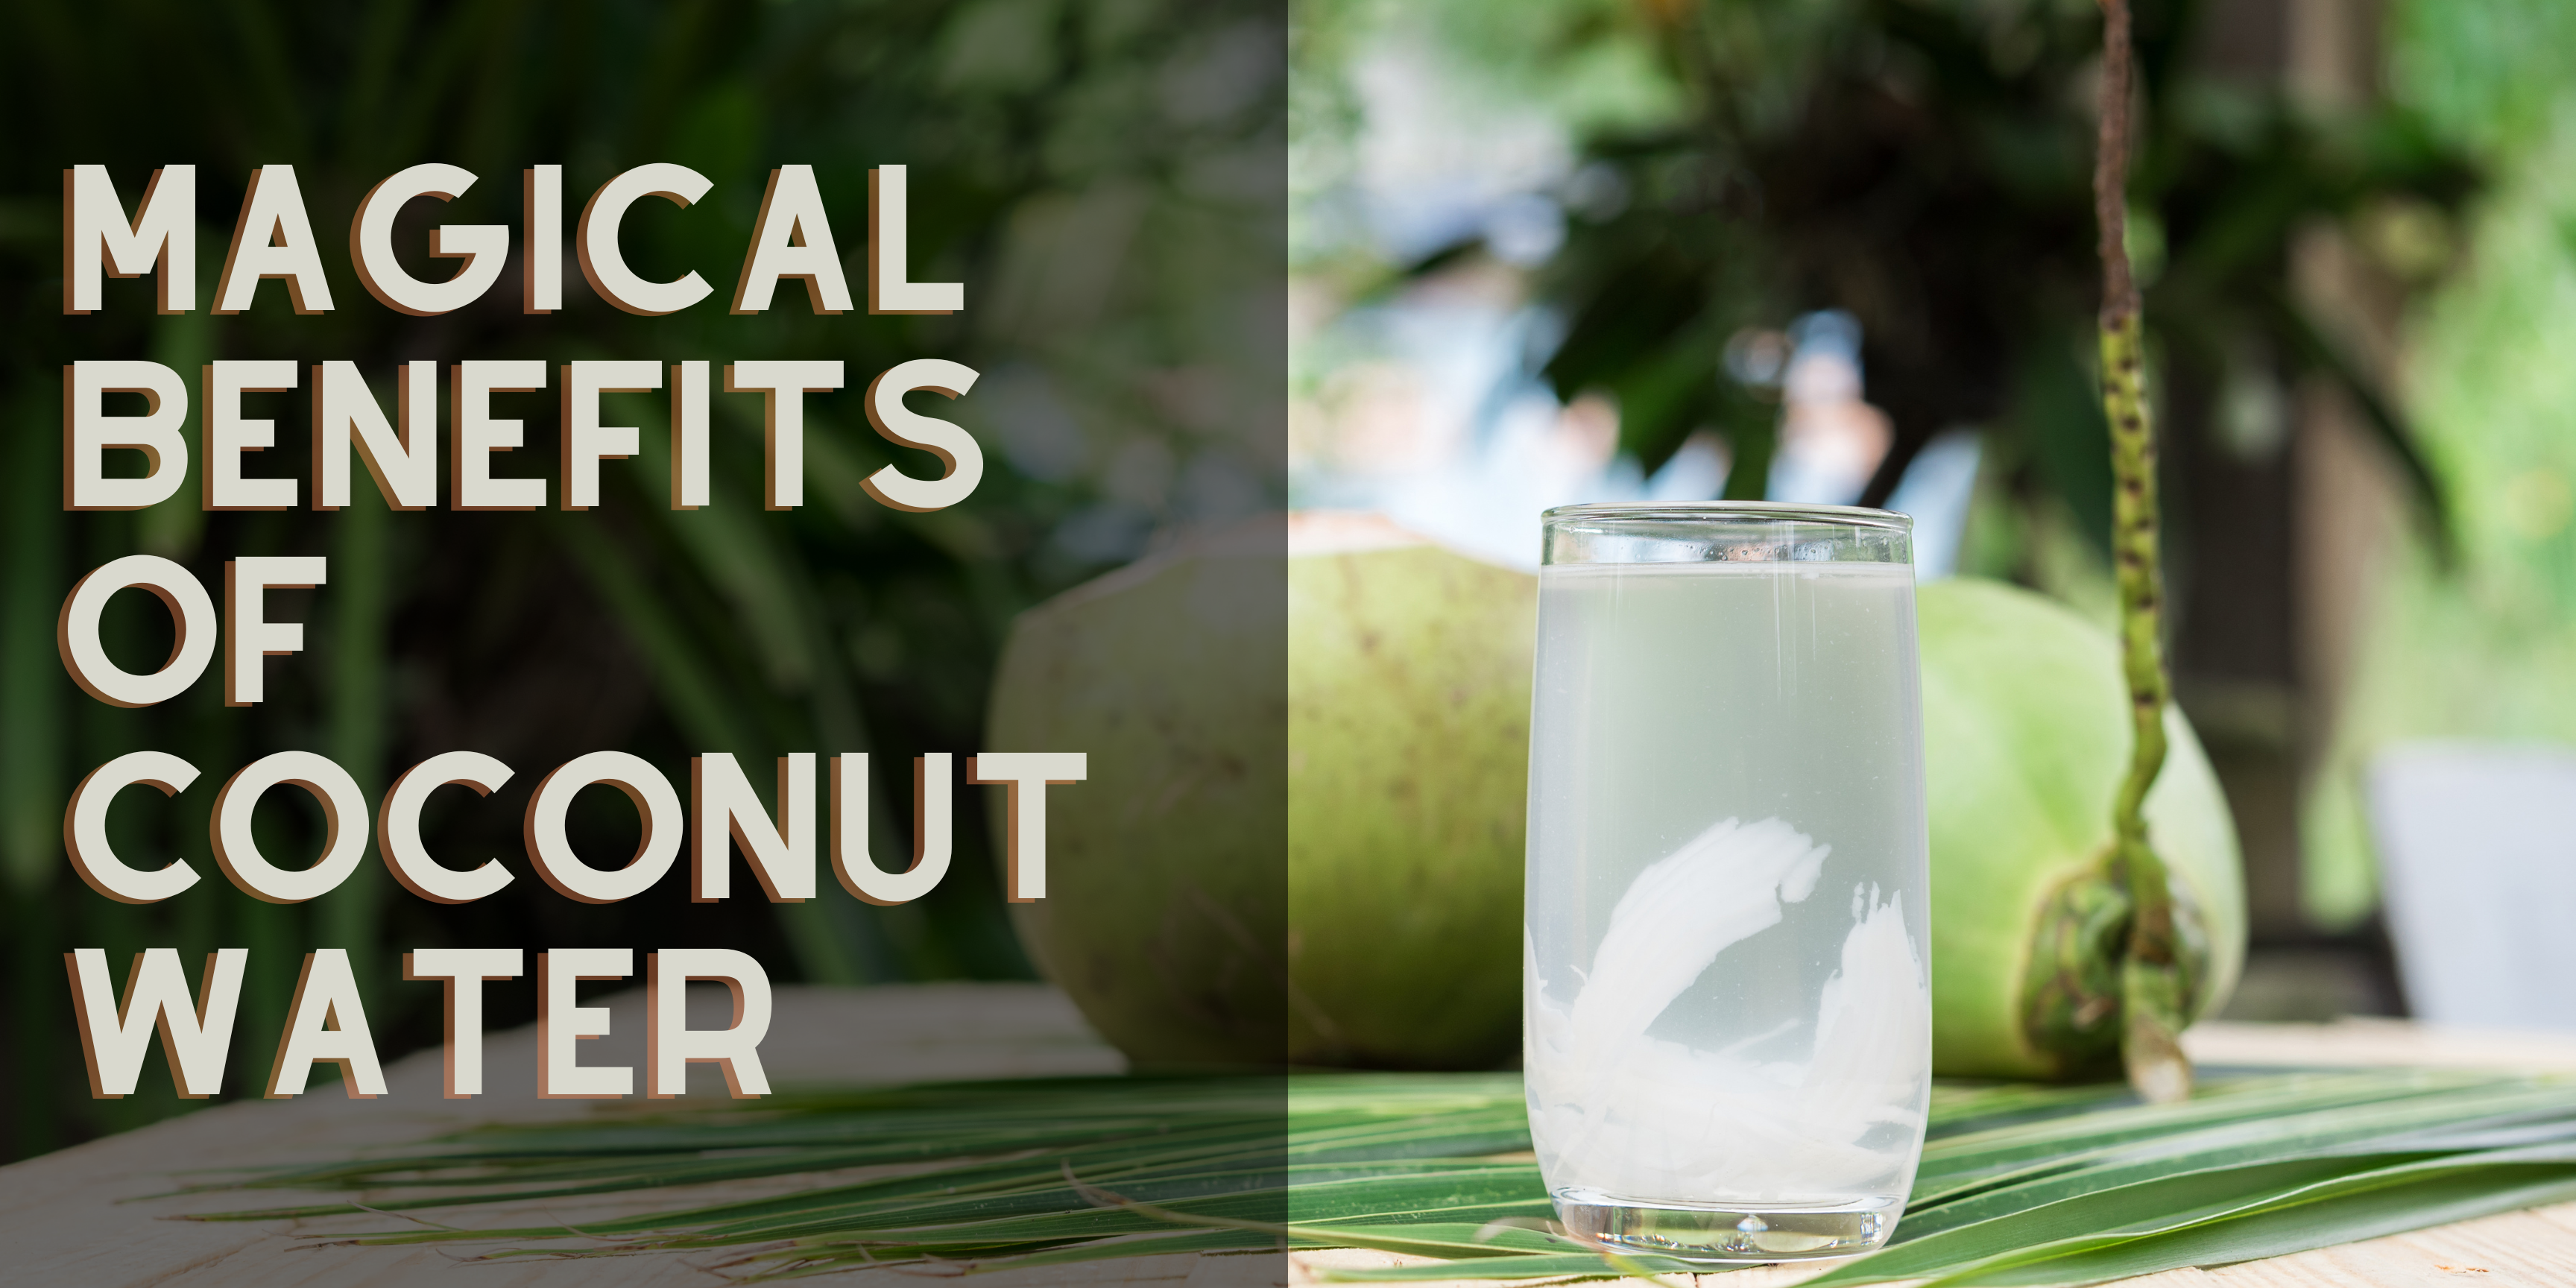 Magical Benefits of Coconut Water